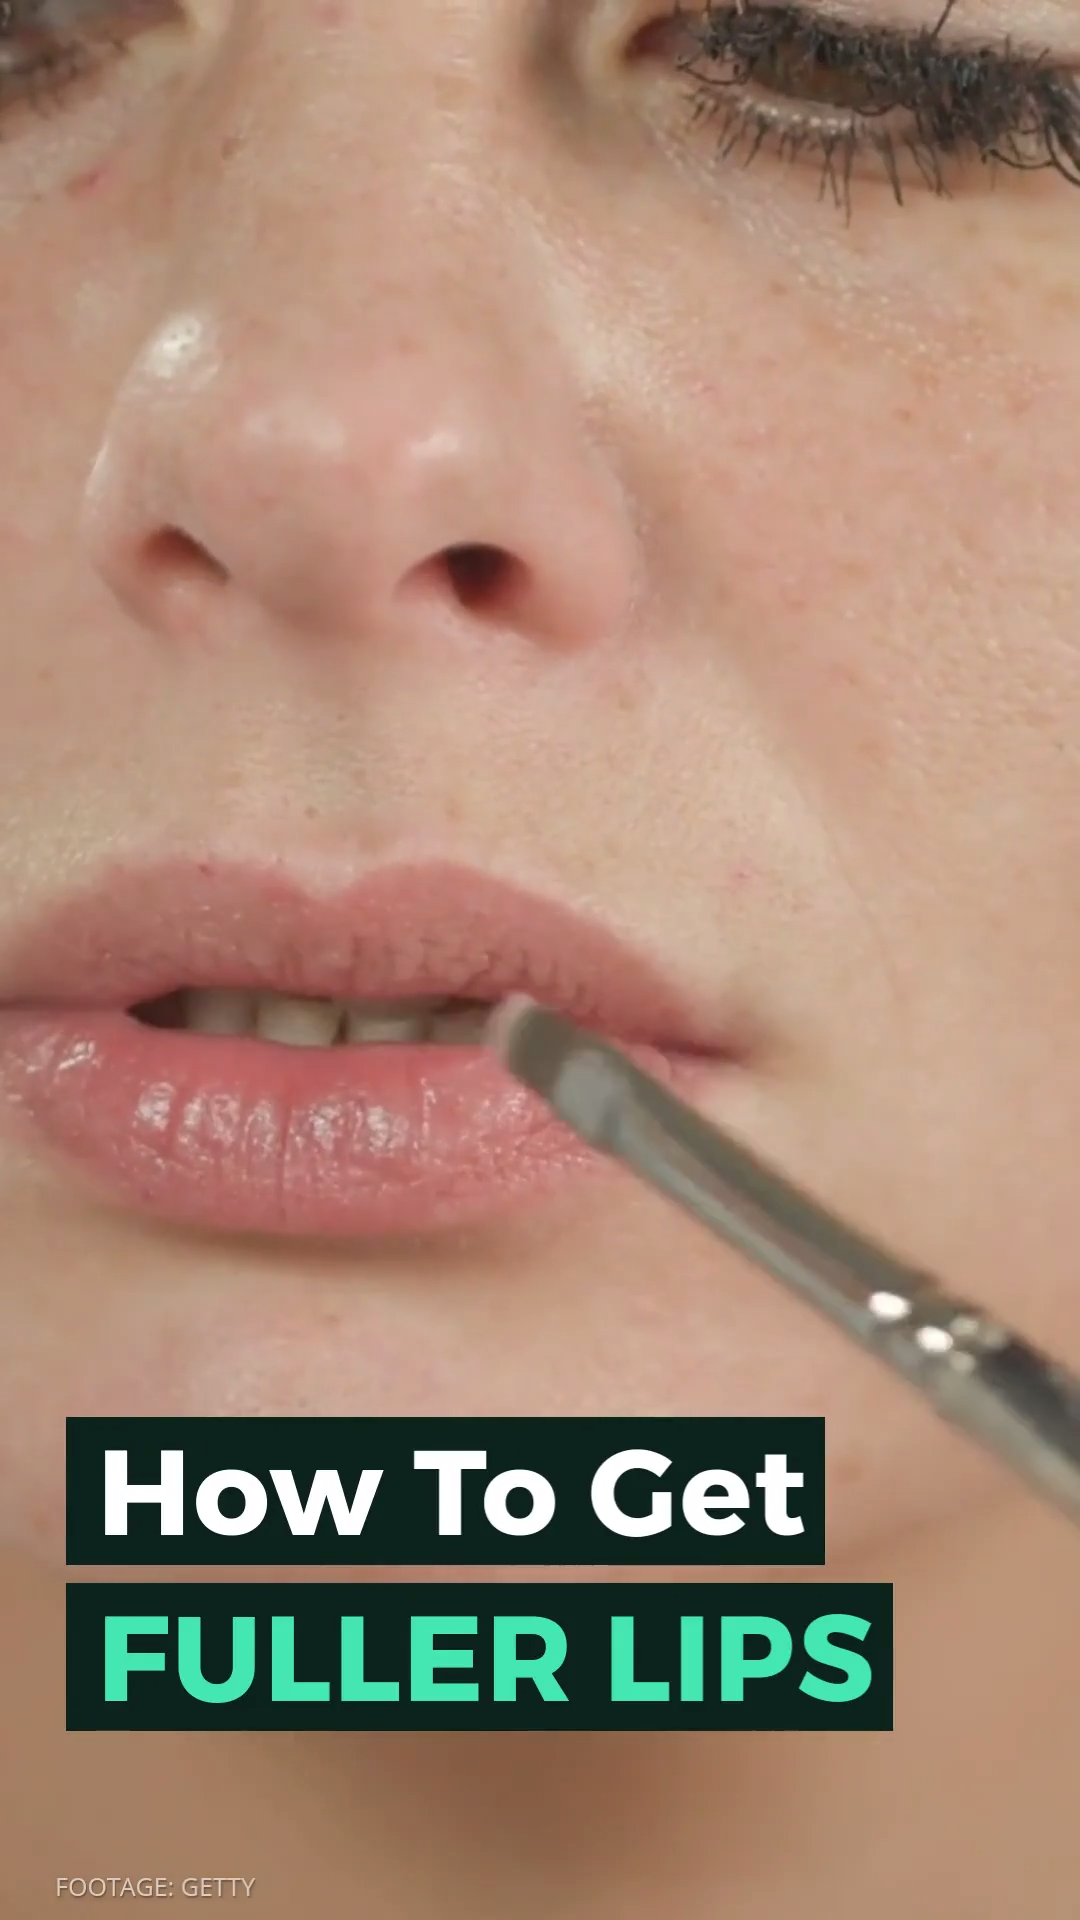 Does It Work? See The Results. - Does It Work? See The Results. -   18 simple beauty Hacks ideas